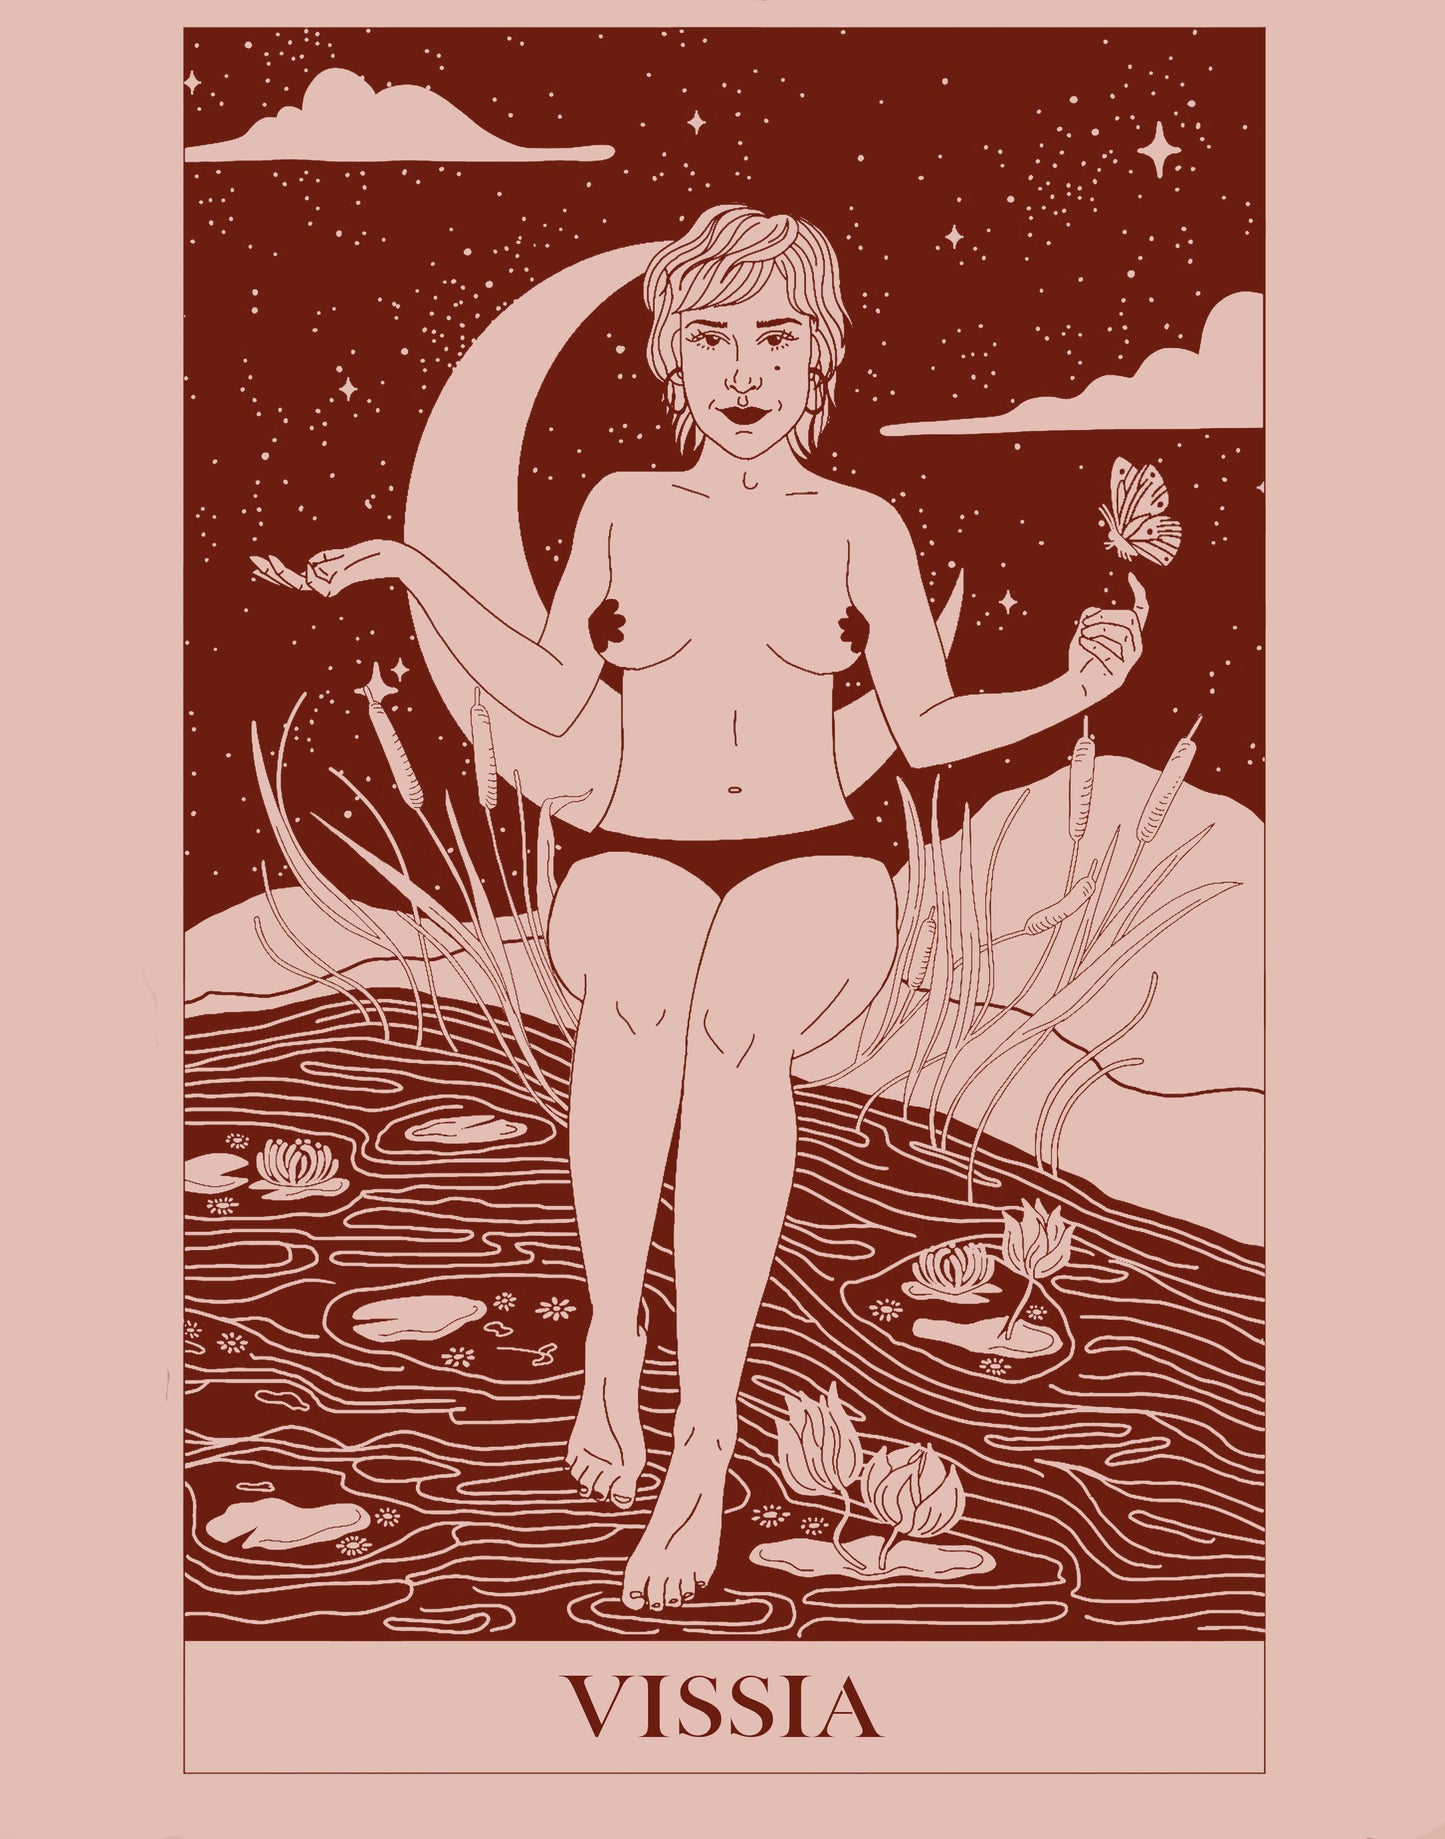 T-shirt illustration is in the style of a tarot card and shows an unclothed woman sitting on the banks of a river; a butterfly hovers above her left hand and her right hand is extended; a crescent moon hangs against a dark starry sky